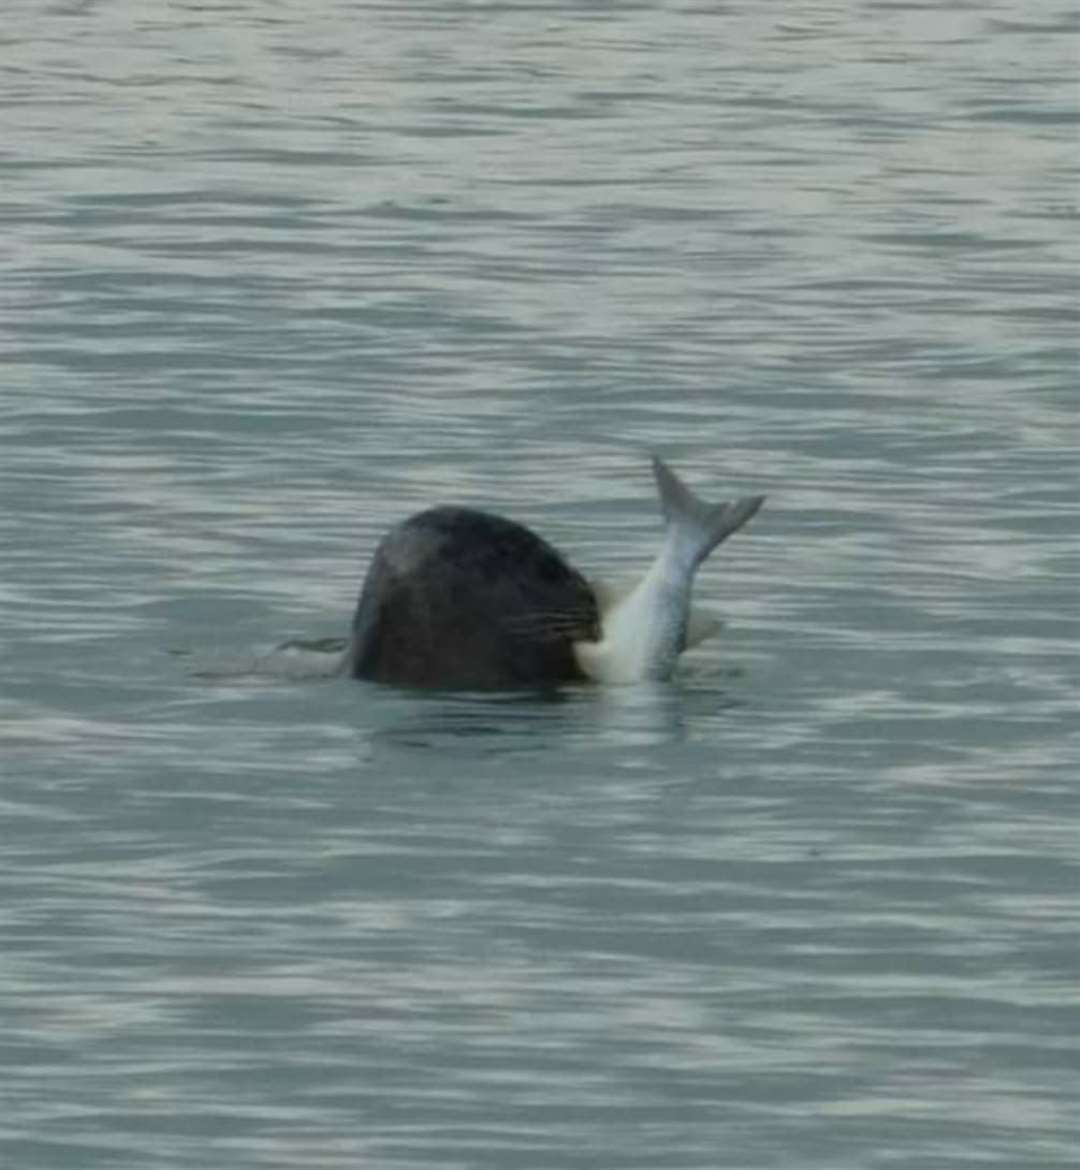 The seal was spotted in the River Medway near Rainham with a fish in its mouth. Picture: Kay Breden